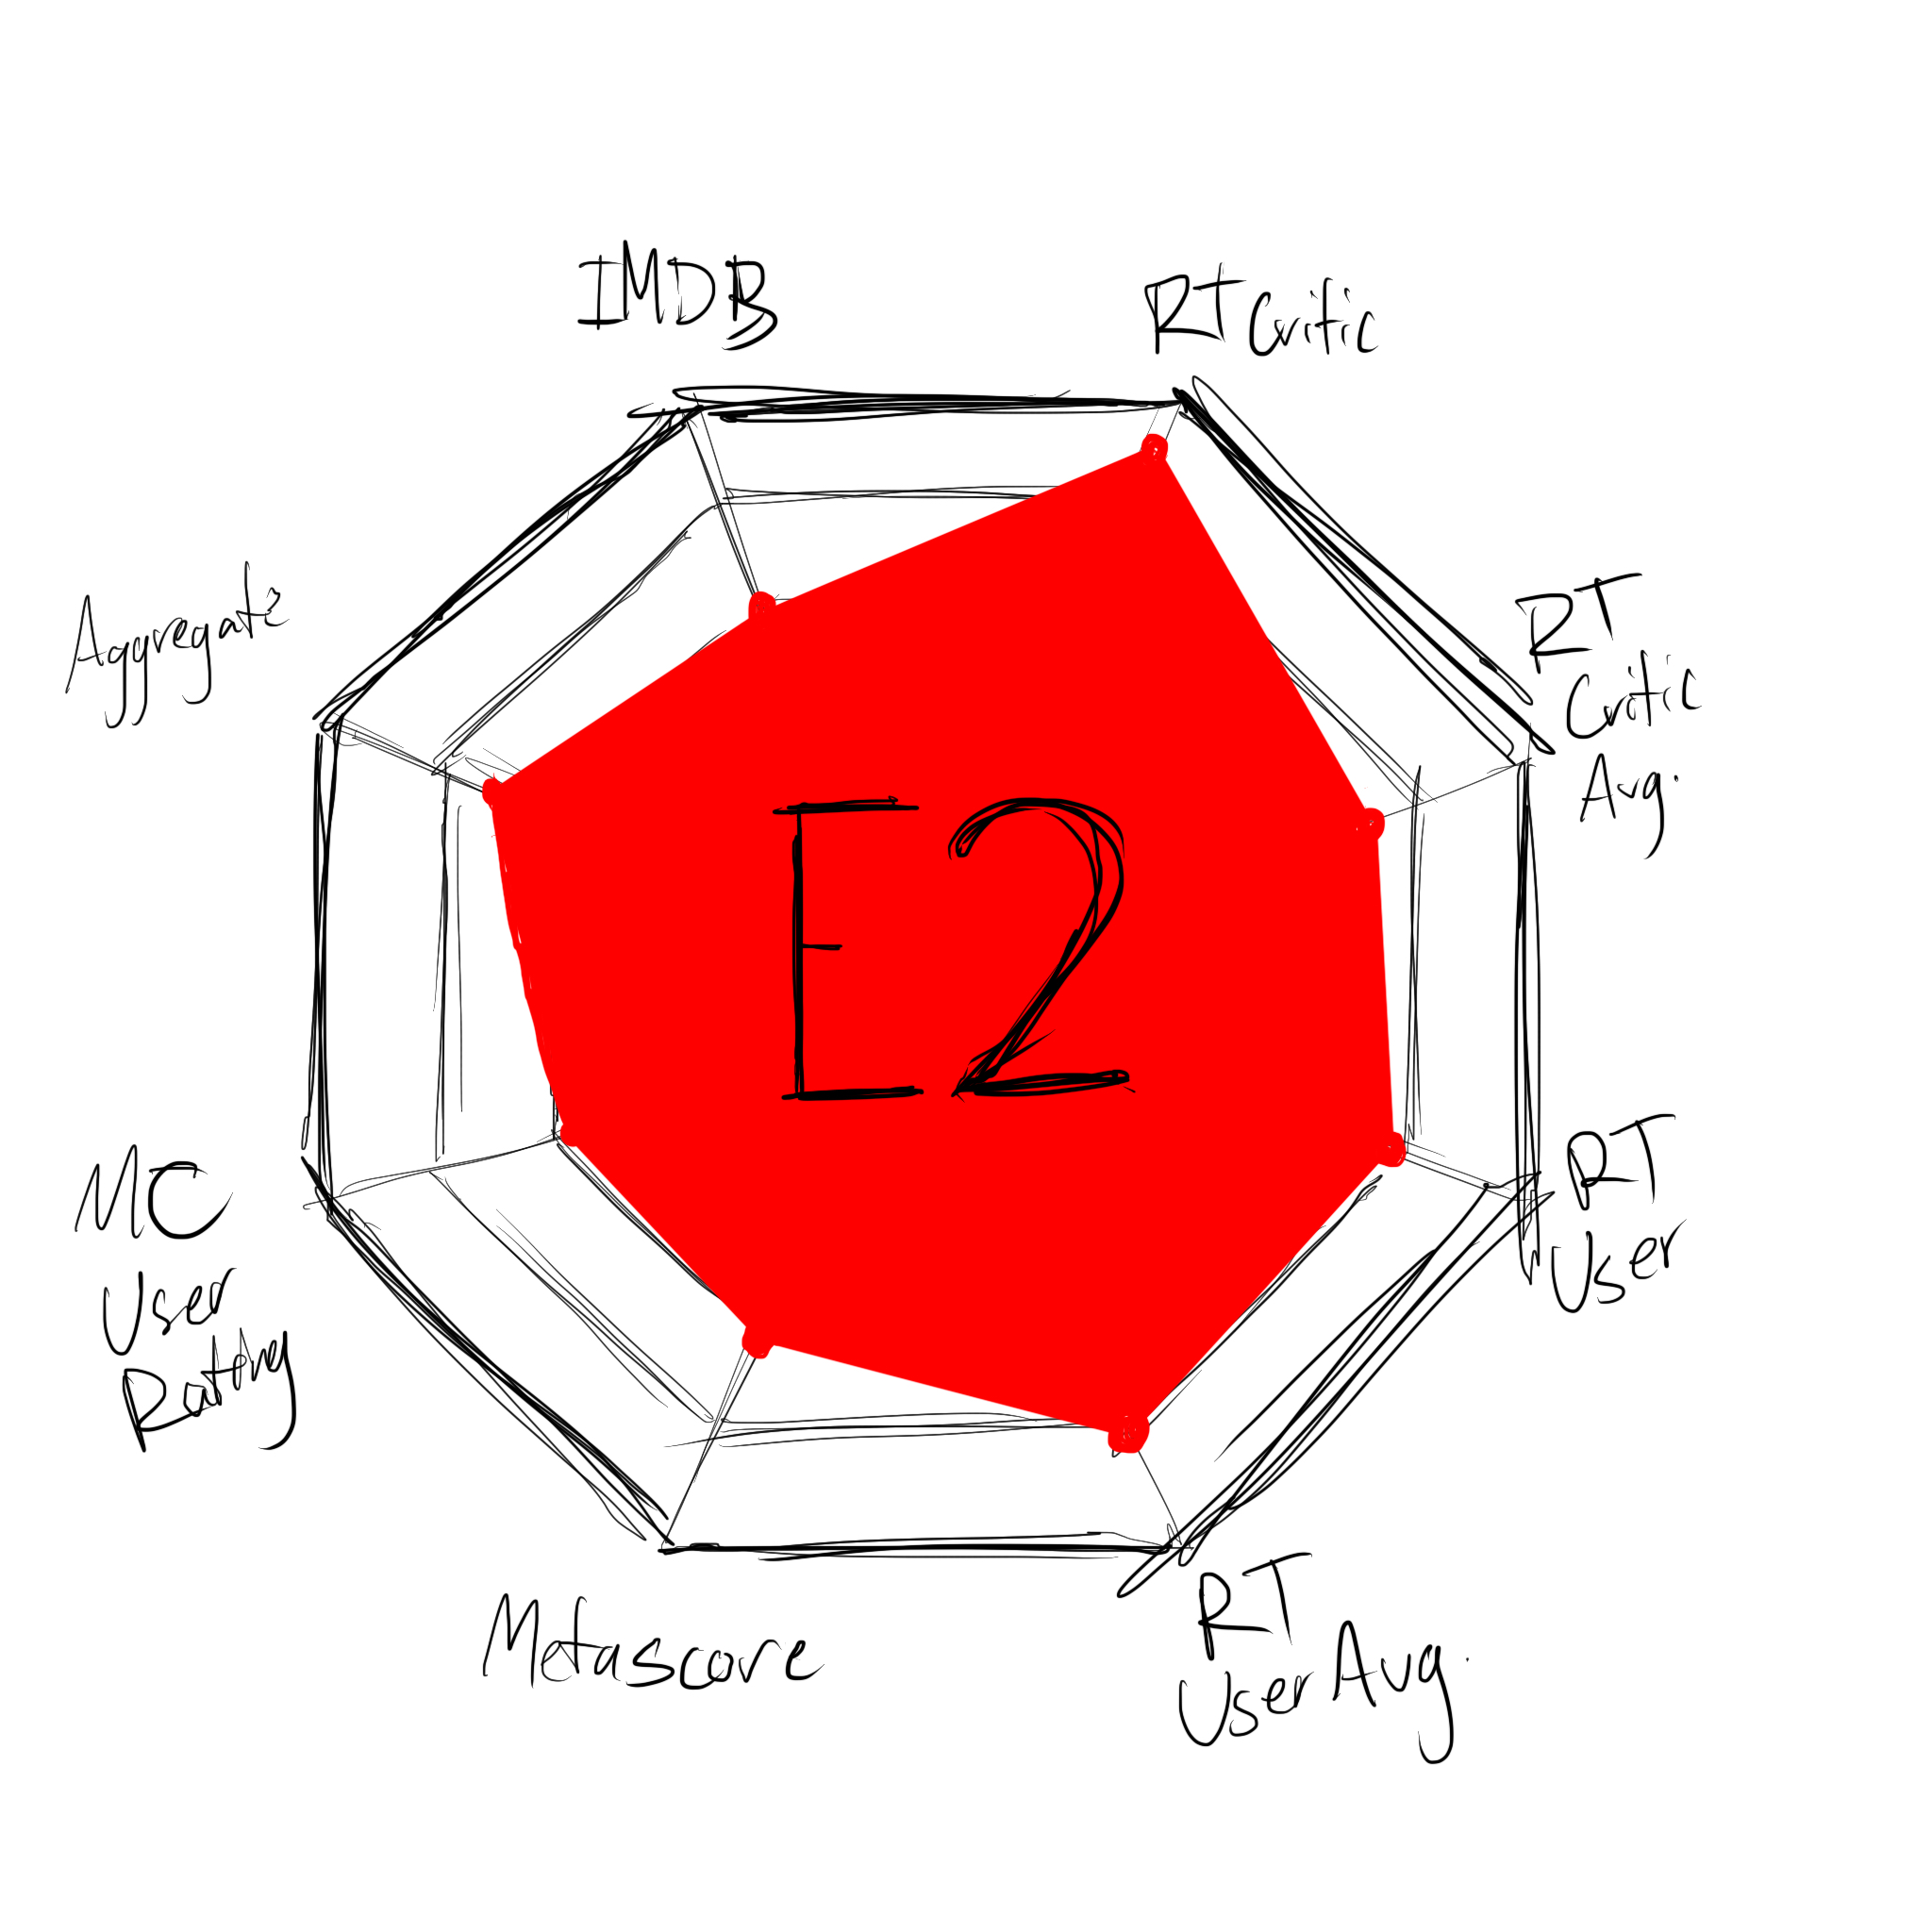 A rough sketch of a radar chart, showing how ratings would look, up close.